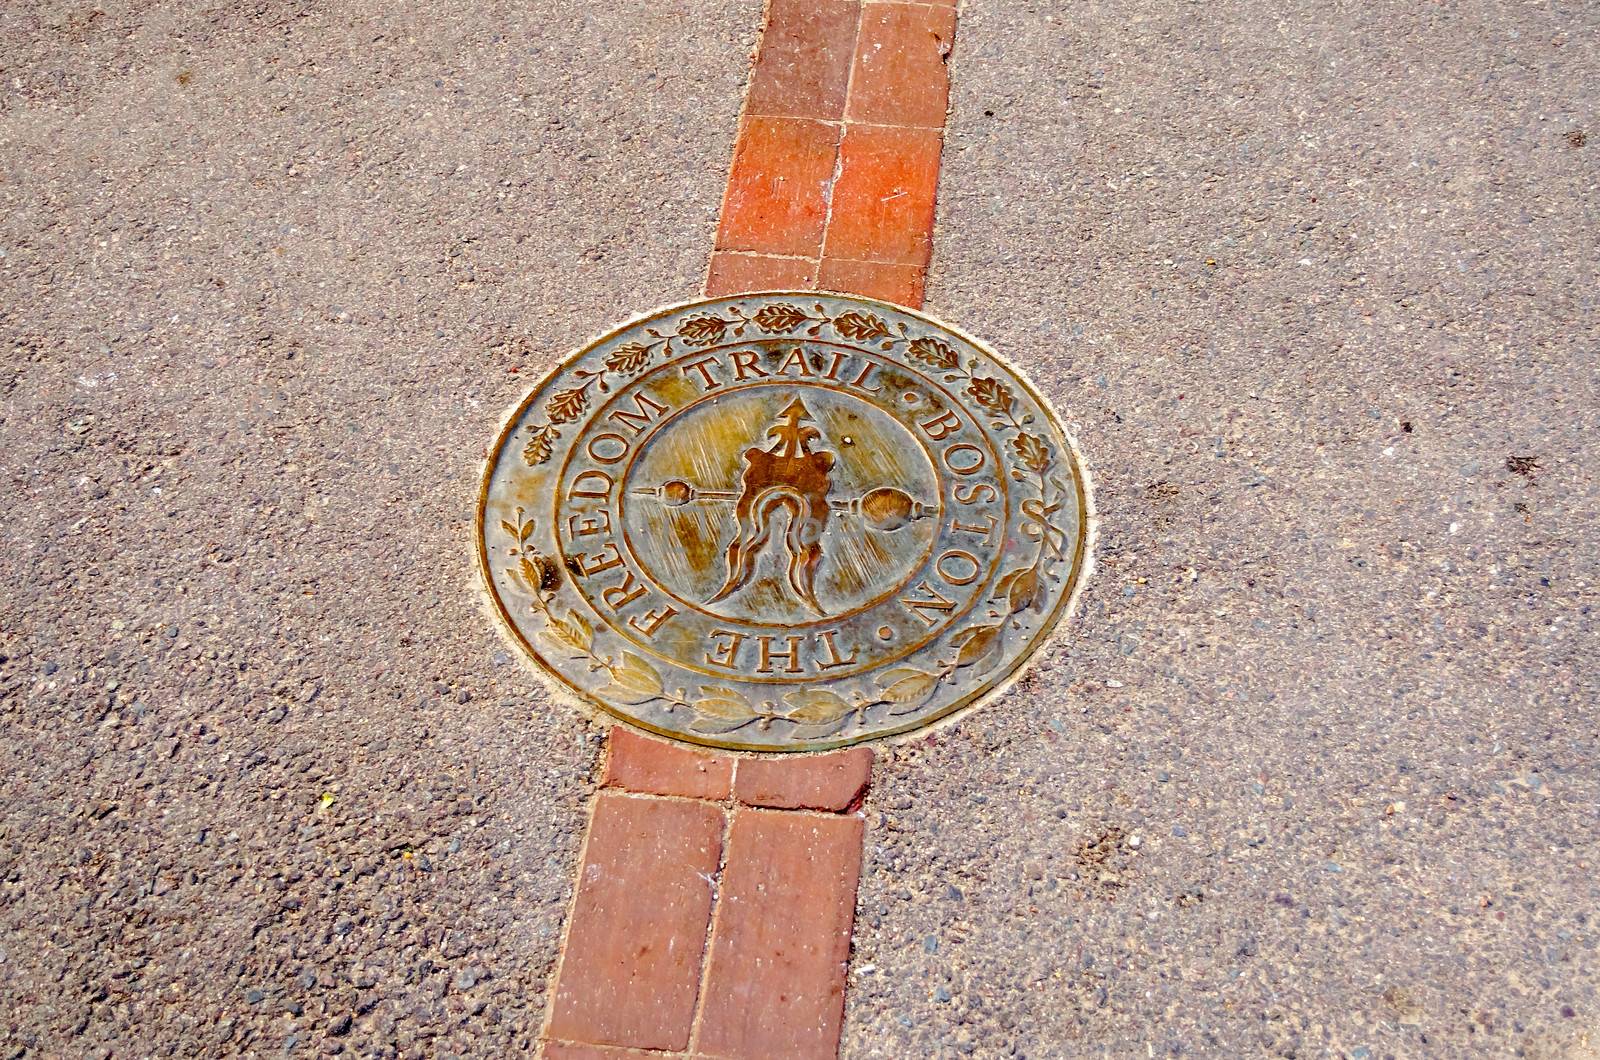 The Freedom Trail Sign, Boston Downtown, USA